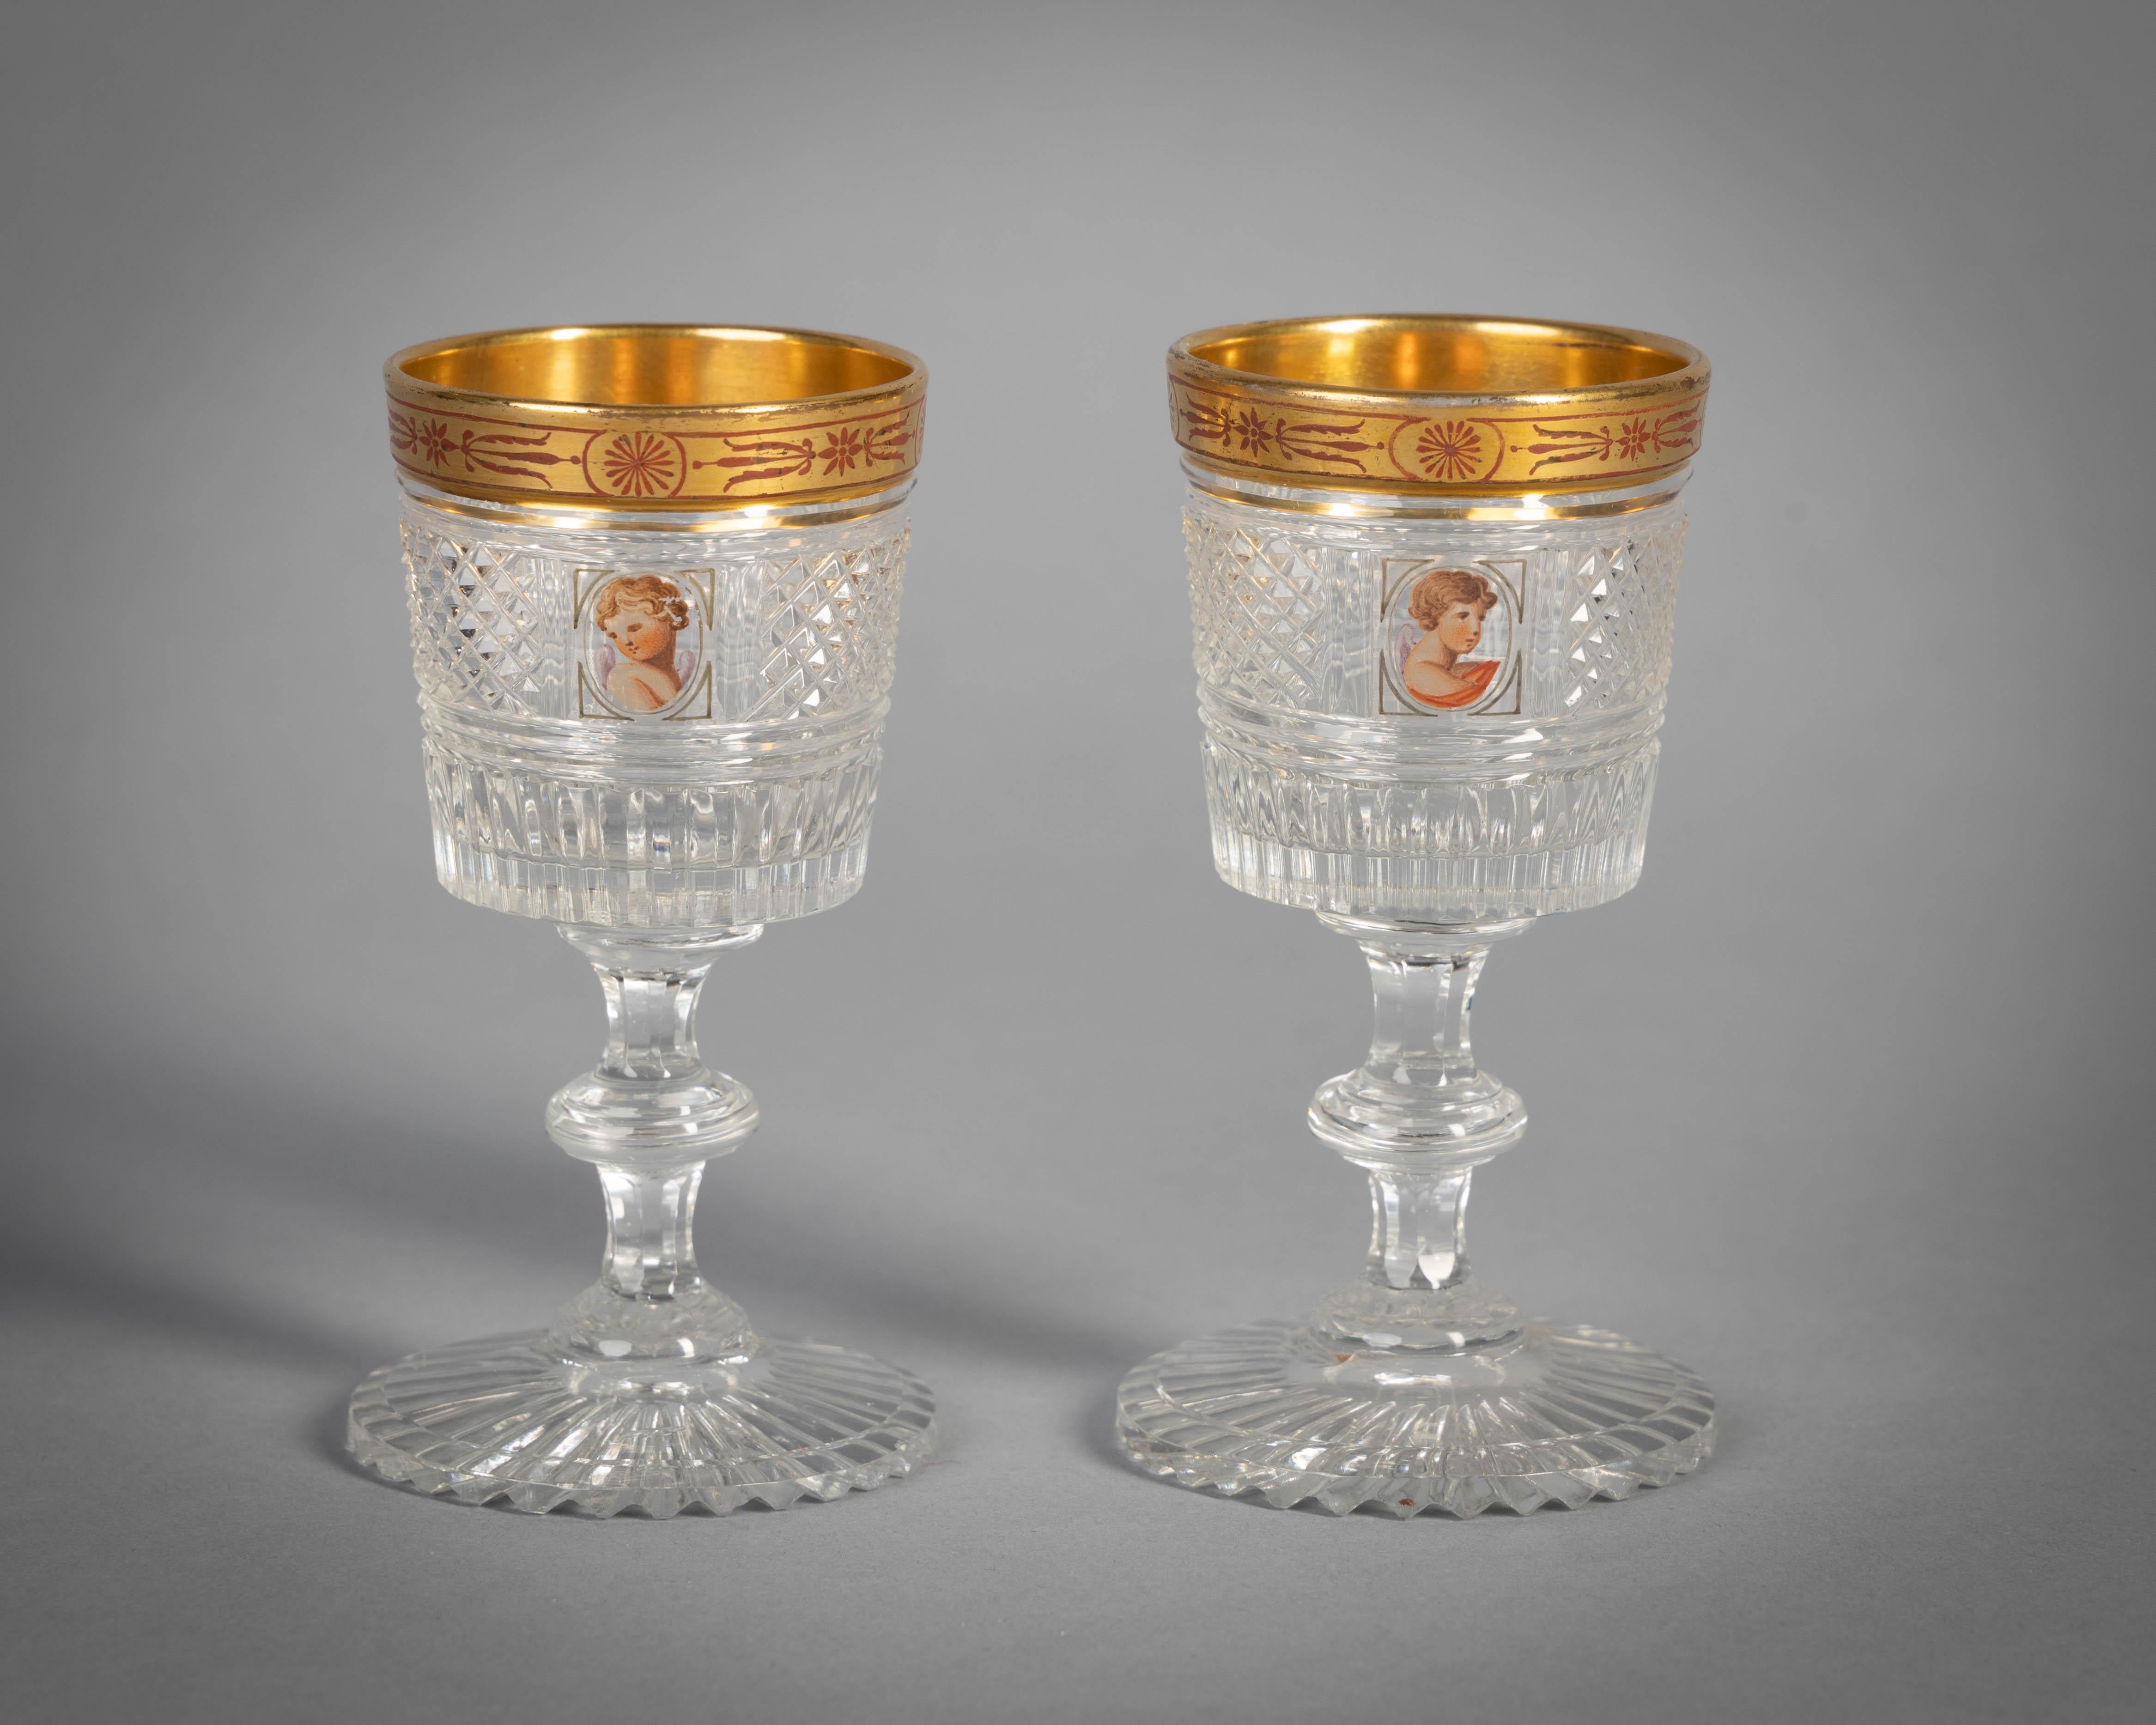 Extensive English Faceted and Enameled and Gilt Glass Service, circa 1815 For Sale 5